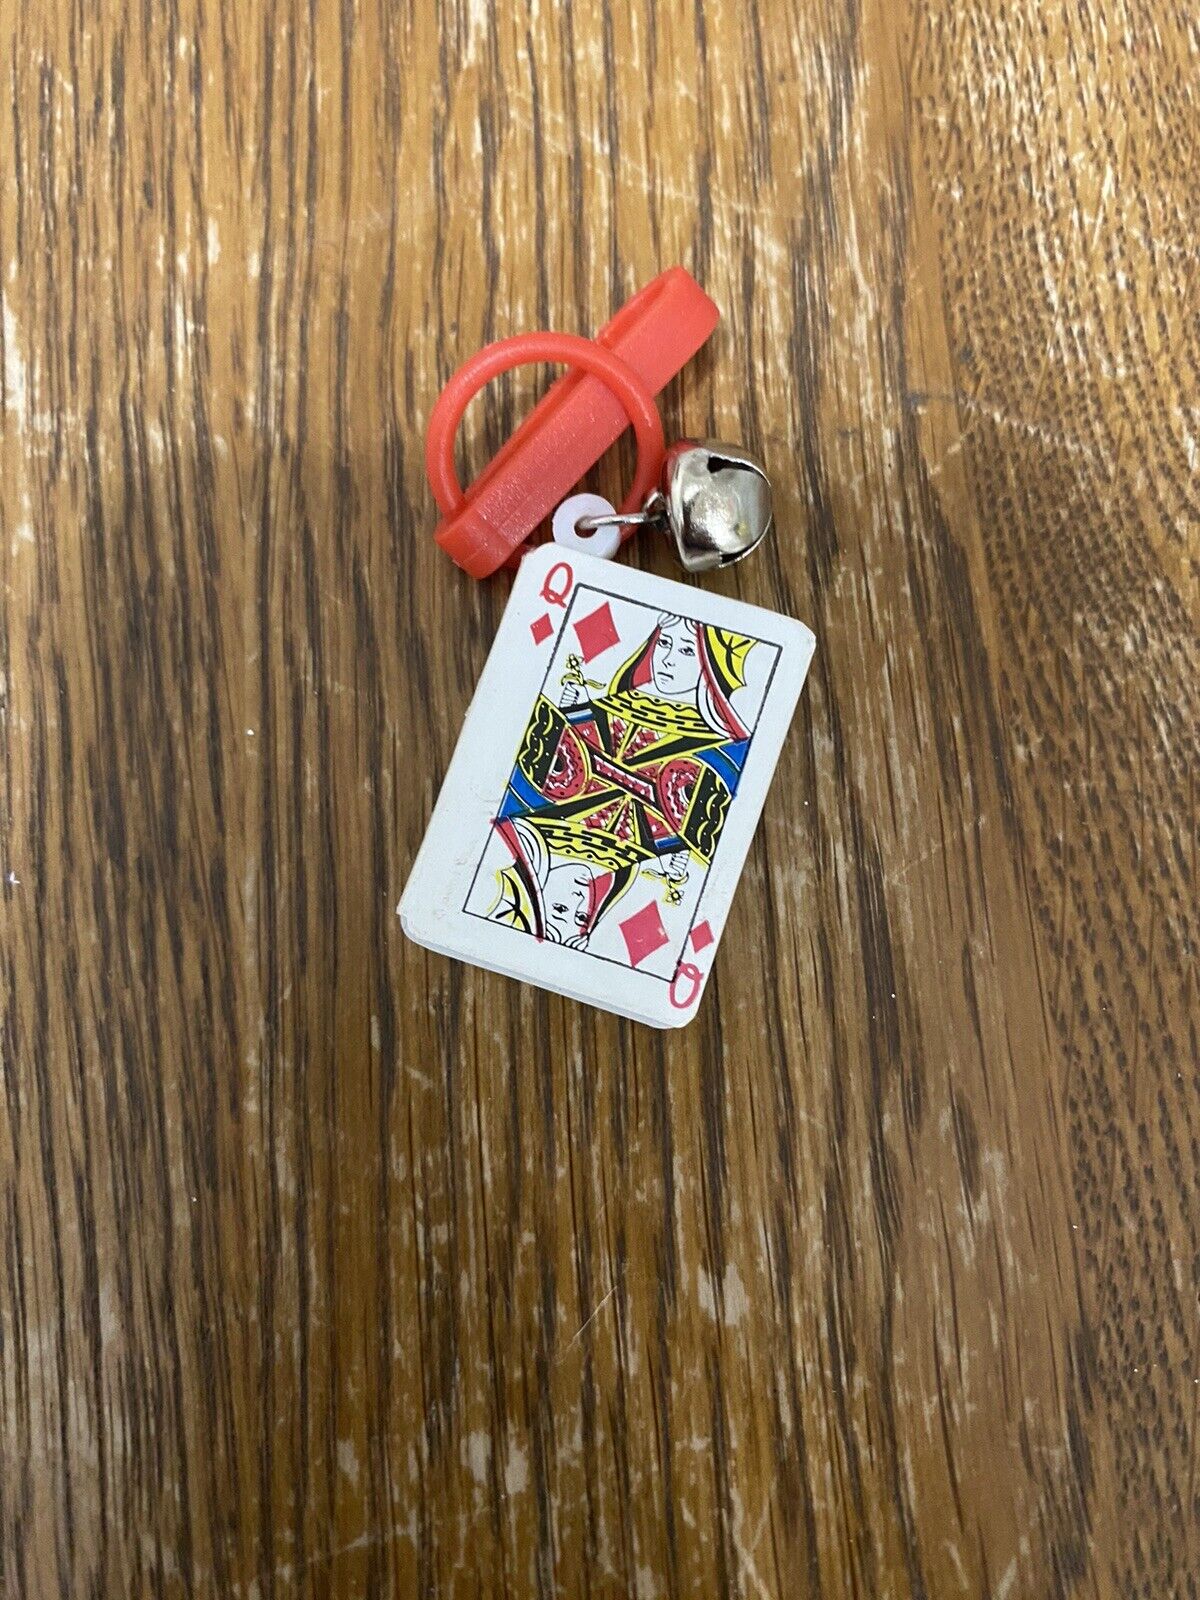 Rare Vintage 1980s Plastic Clip On Queen Playing Card Charm For 80s Necklace